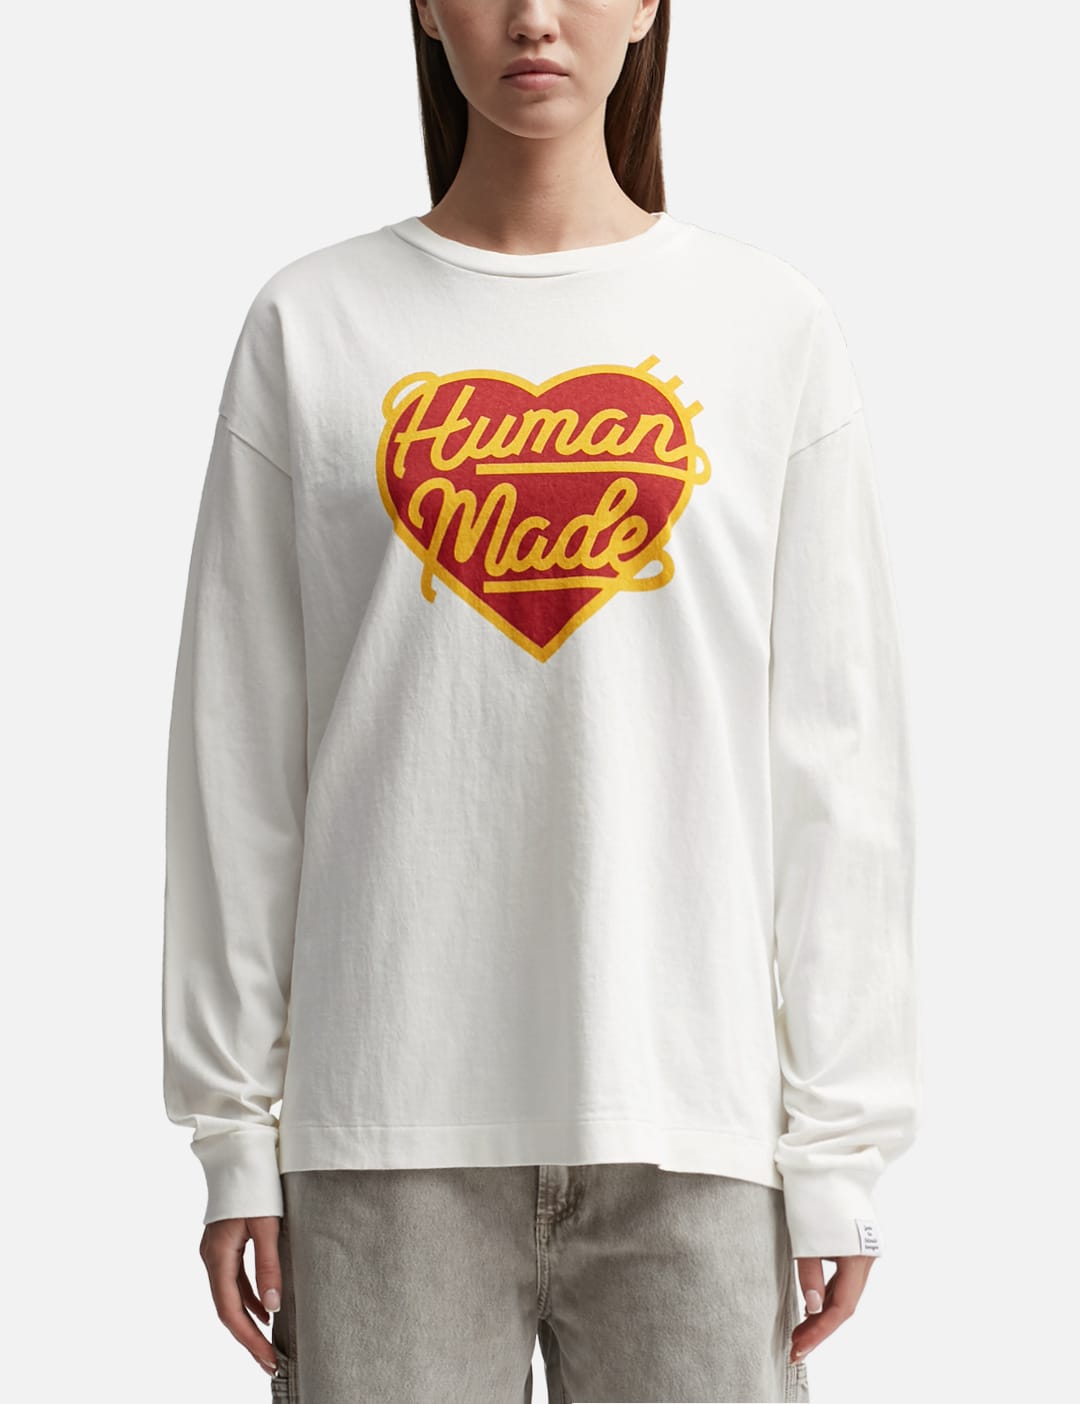 Human Made Graphic Long Sleeve T-shirt #4 In White | ModeSens